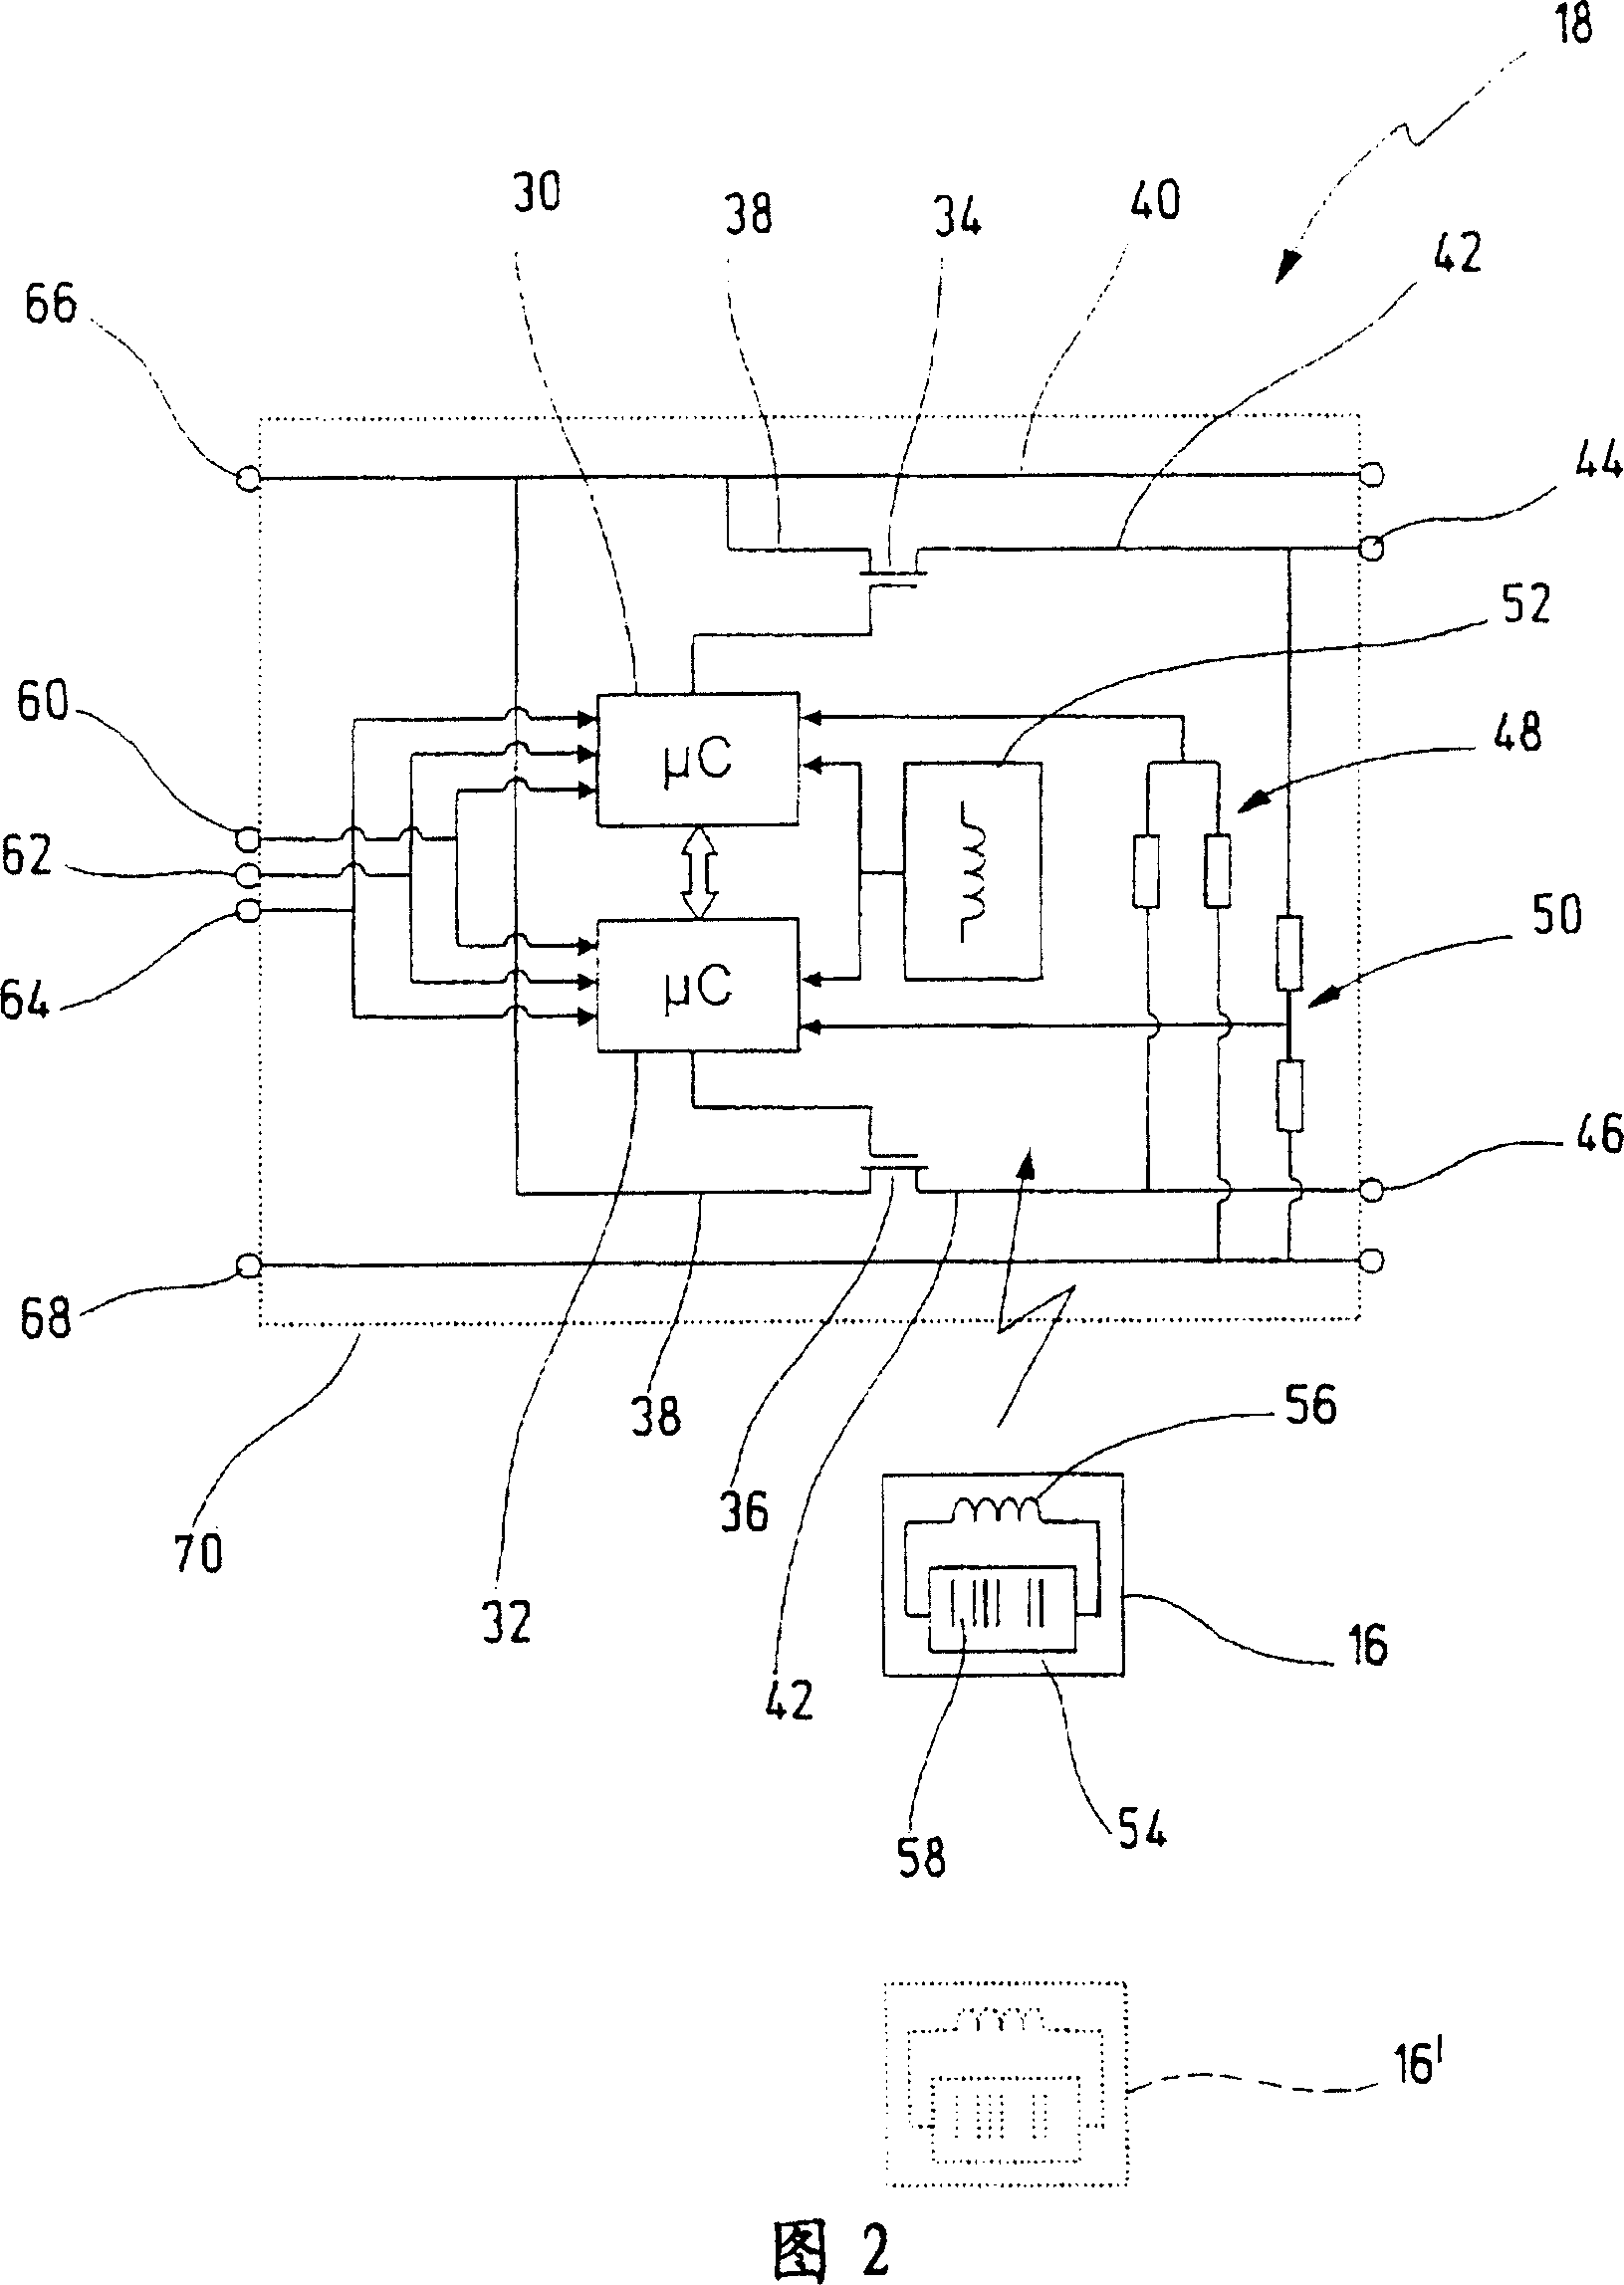 Signaling device for a safety circuit